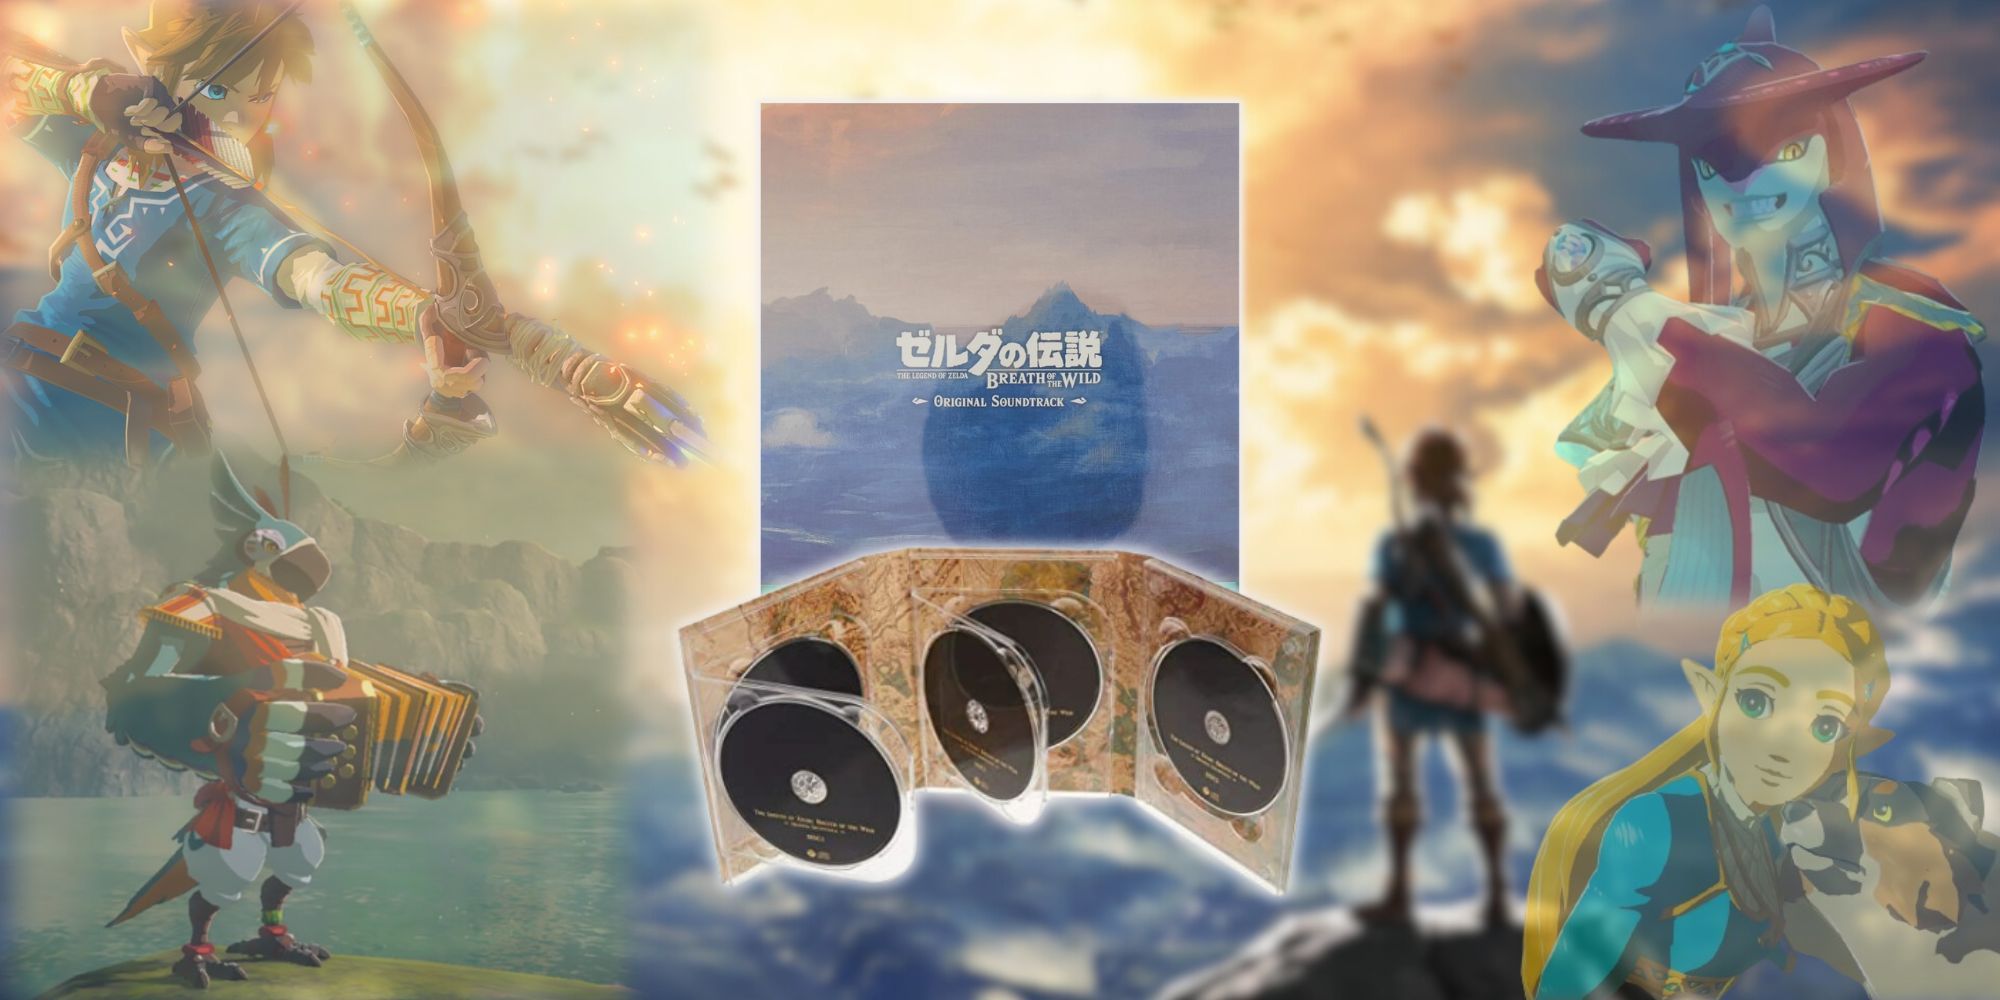 Feature banner with The Legend of Zelda Breath of the Wild Soundtrack surrounded by images of Link, Kass, Sidon and Zelda